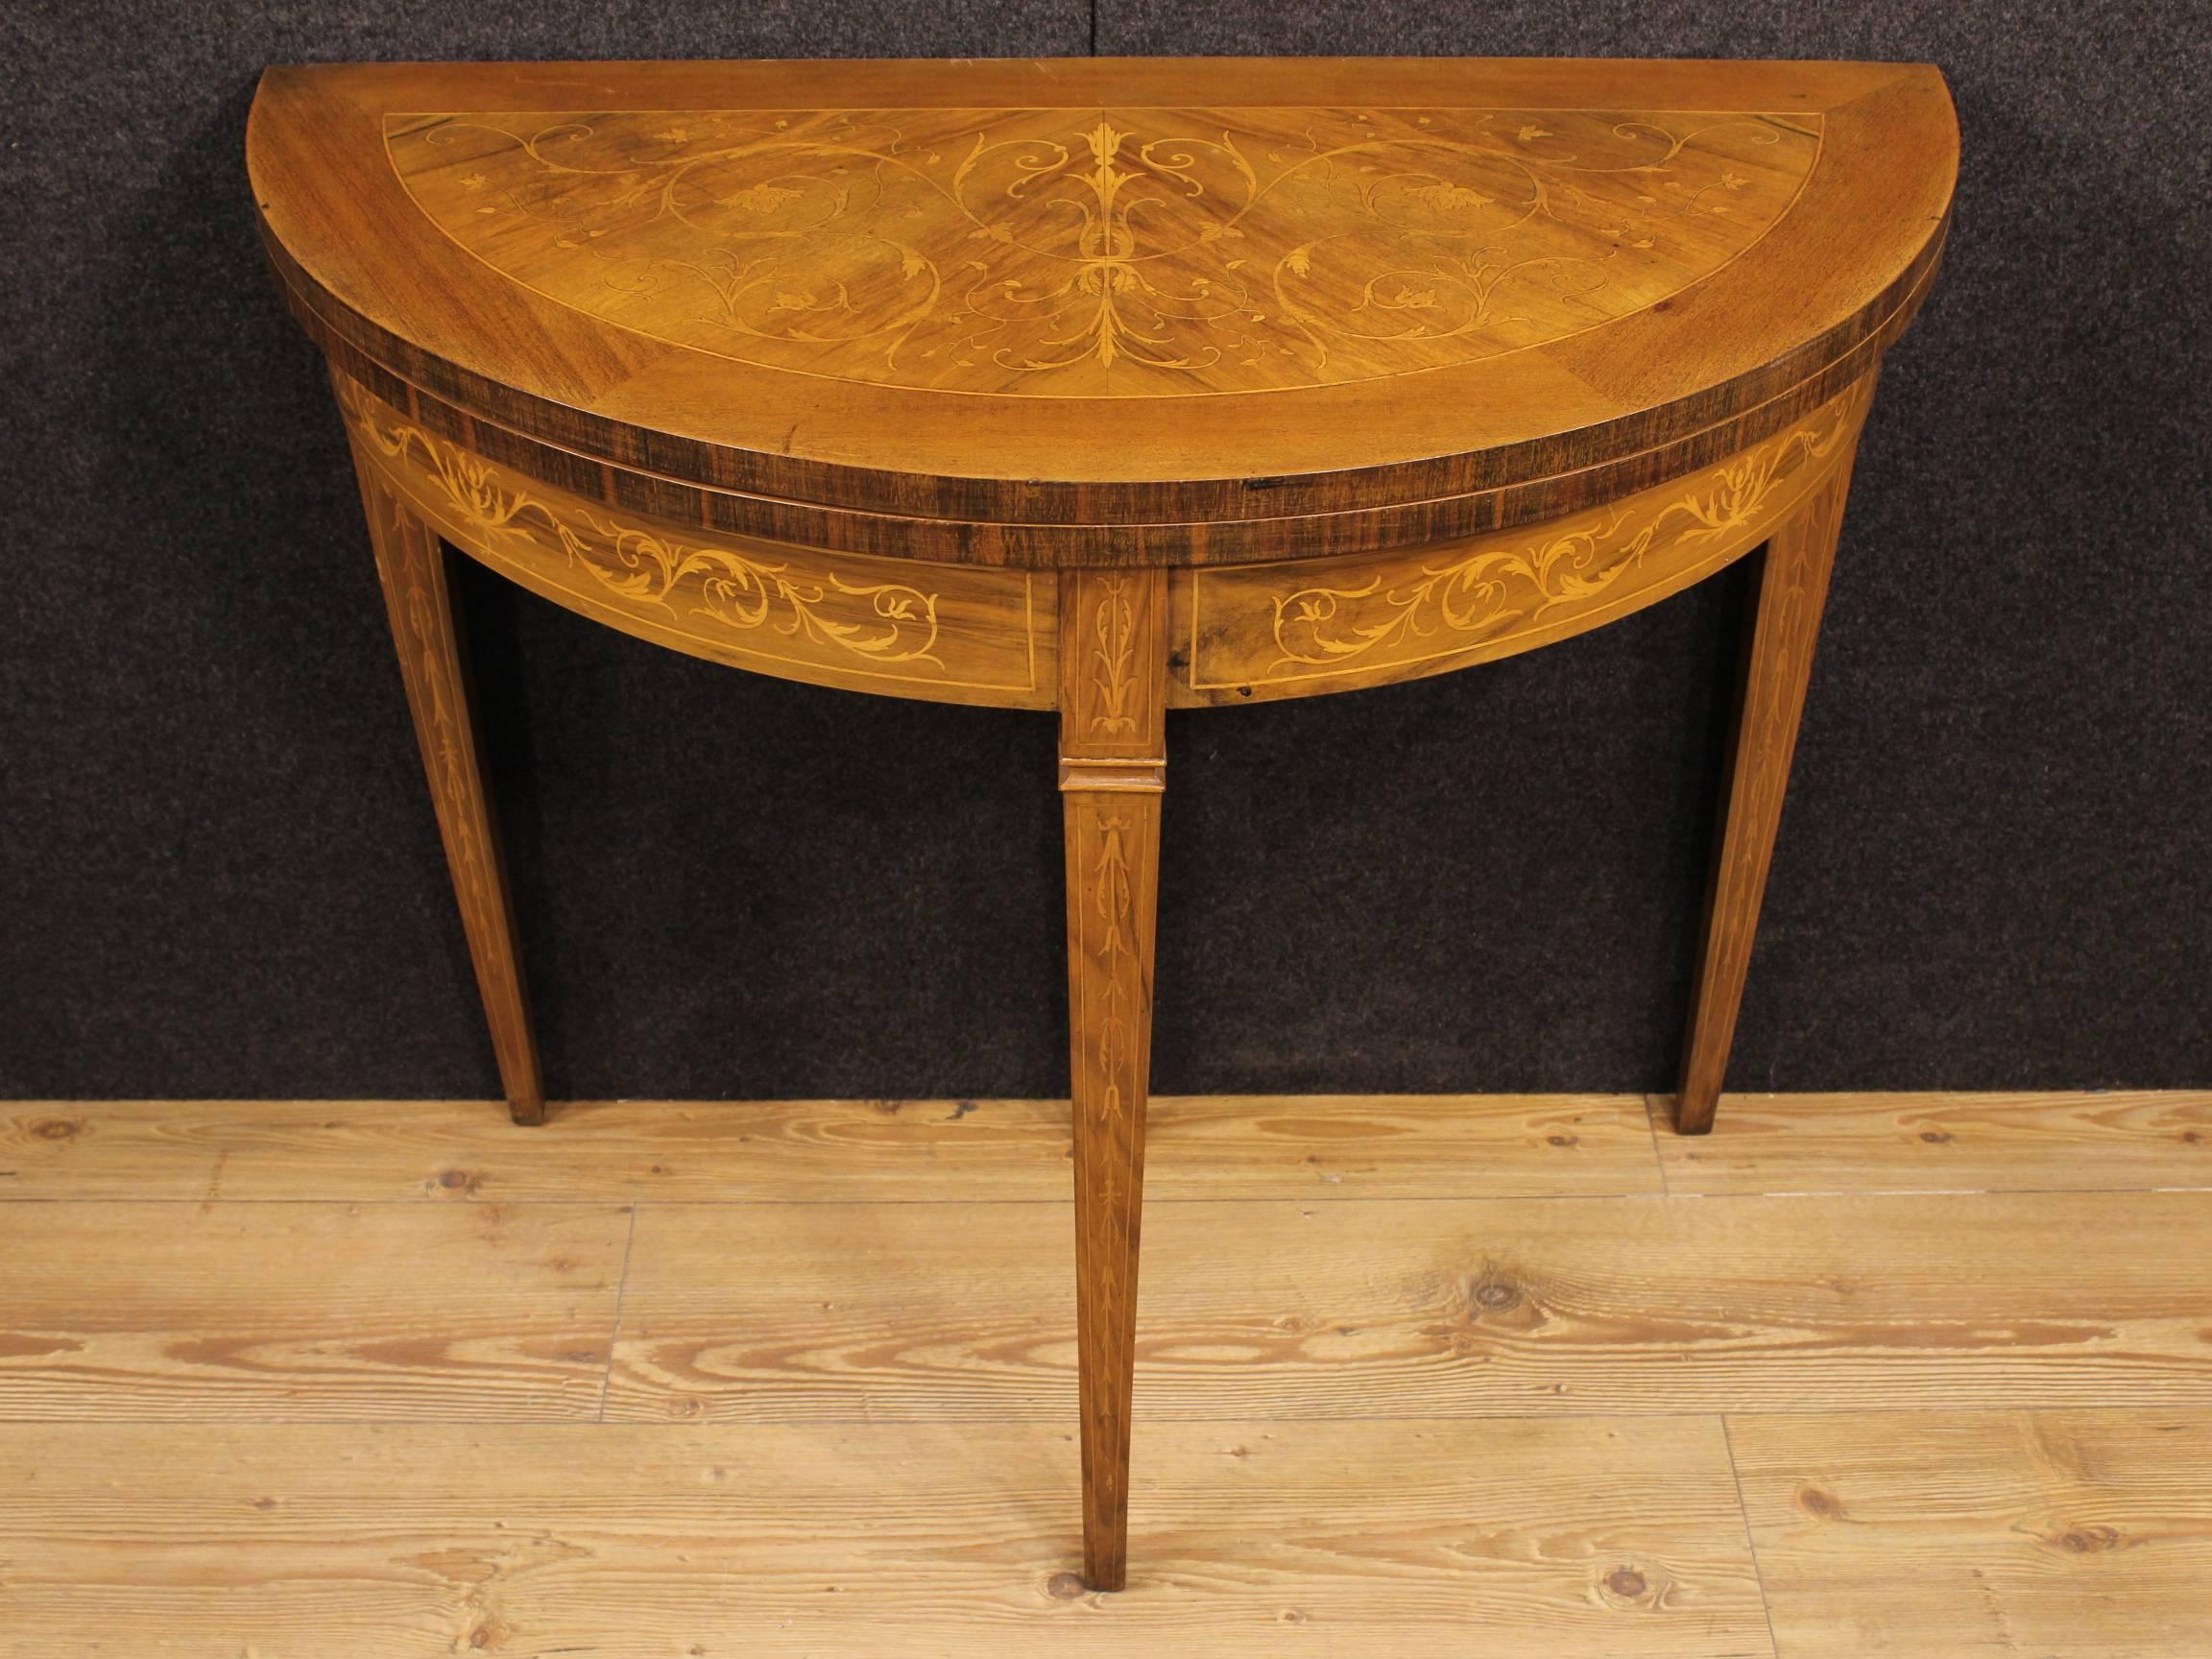 Italian half moon table finely inlaid in walnut and various woods. Furniture with opening top that offers the service of a round table (90 cm diameter) which is also inlaid. 20th century table, of excellent proportions, ideal for a living room but